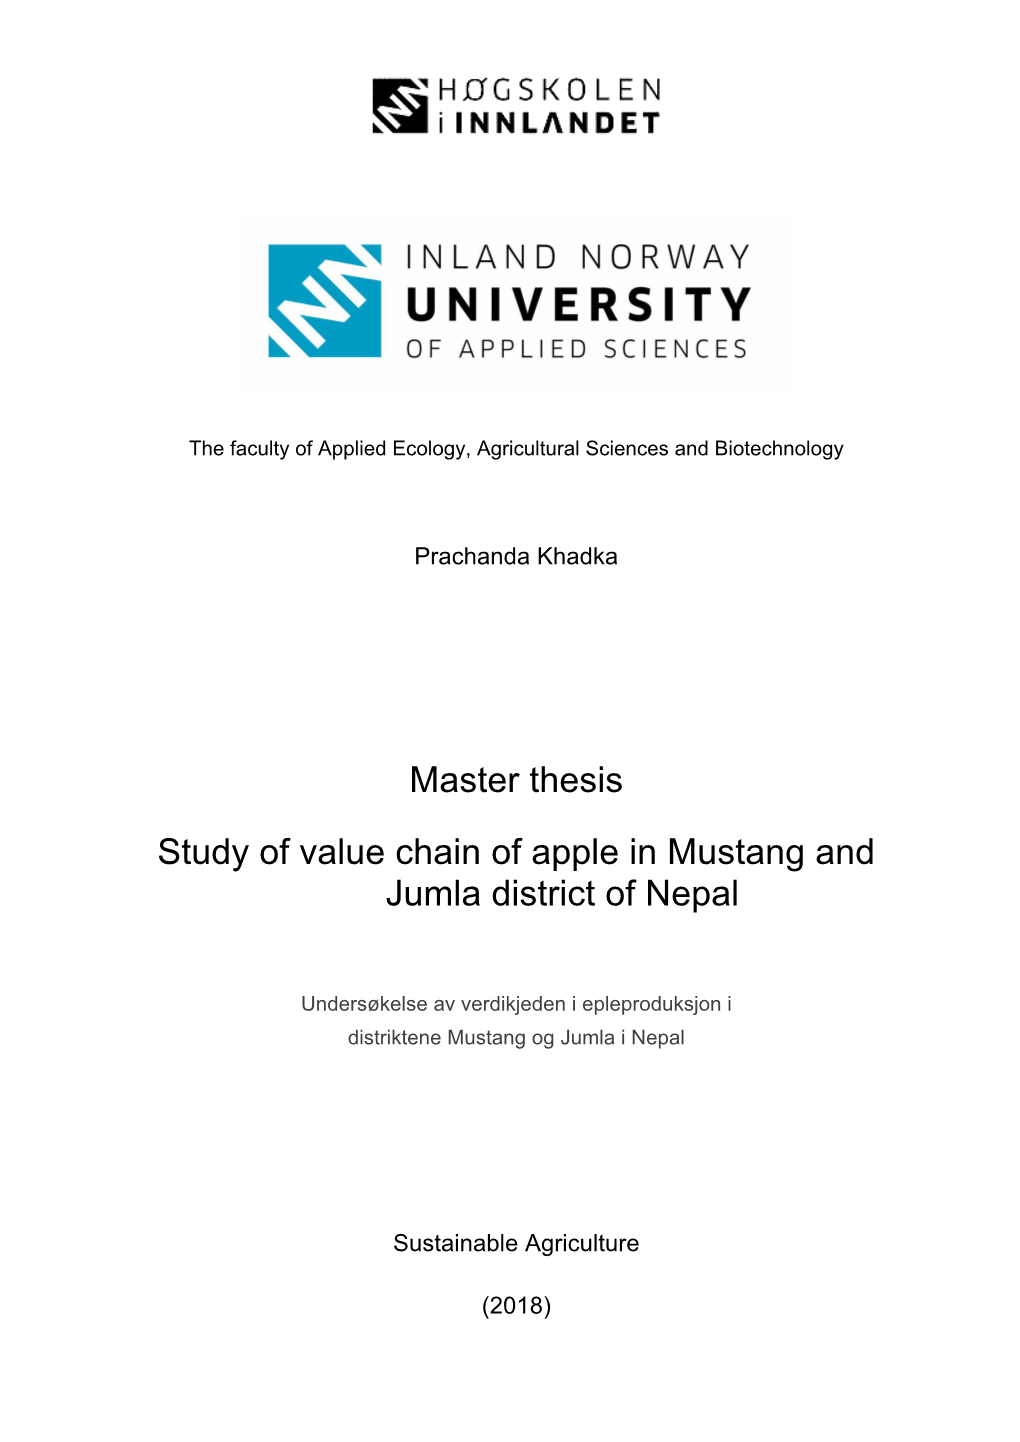 Master Thesis Study of Value Chain of Apple in Mustang and Jumla District